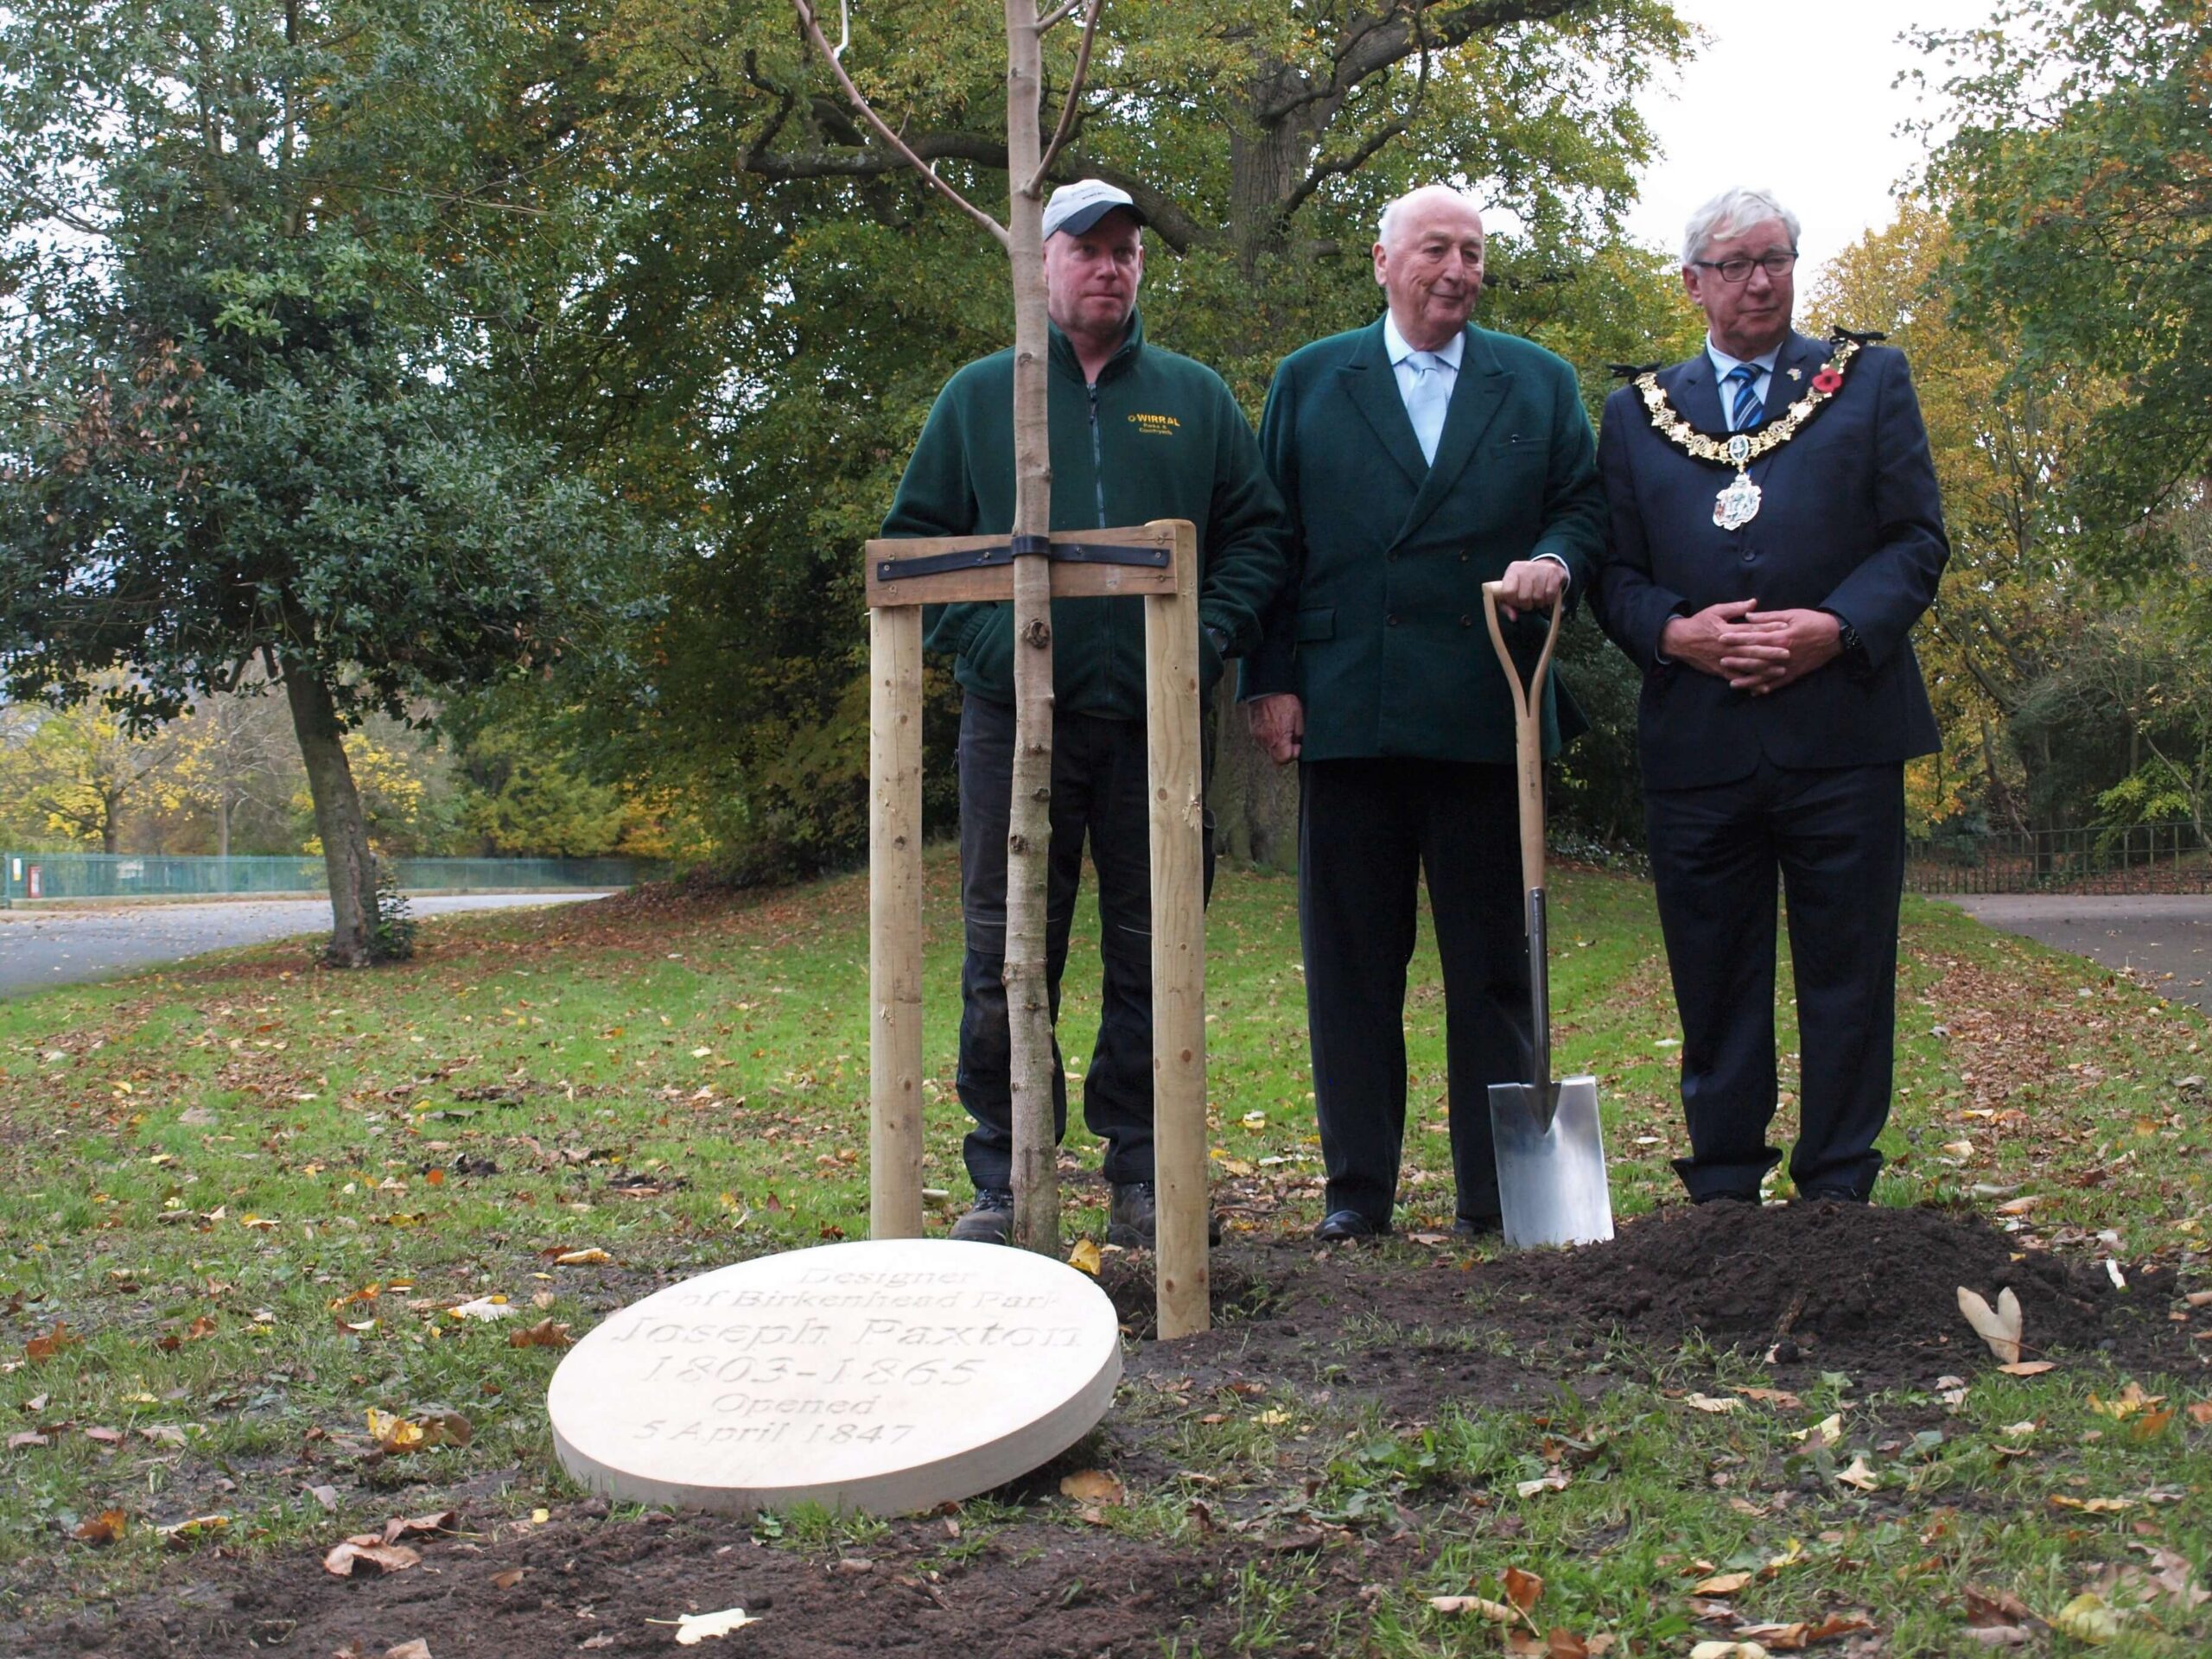 From left to right: Jimmy Ashcroft, Birkenhead Park's Head Gardner, the Duke of Devonshire and Mayor of Wirral